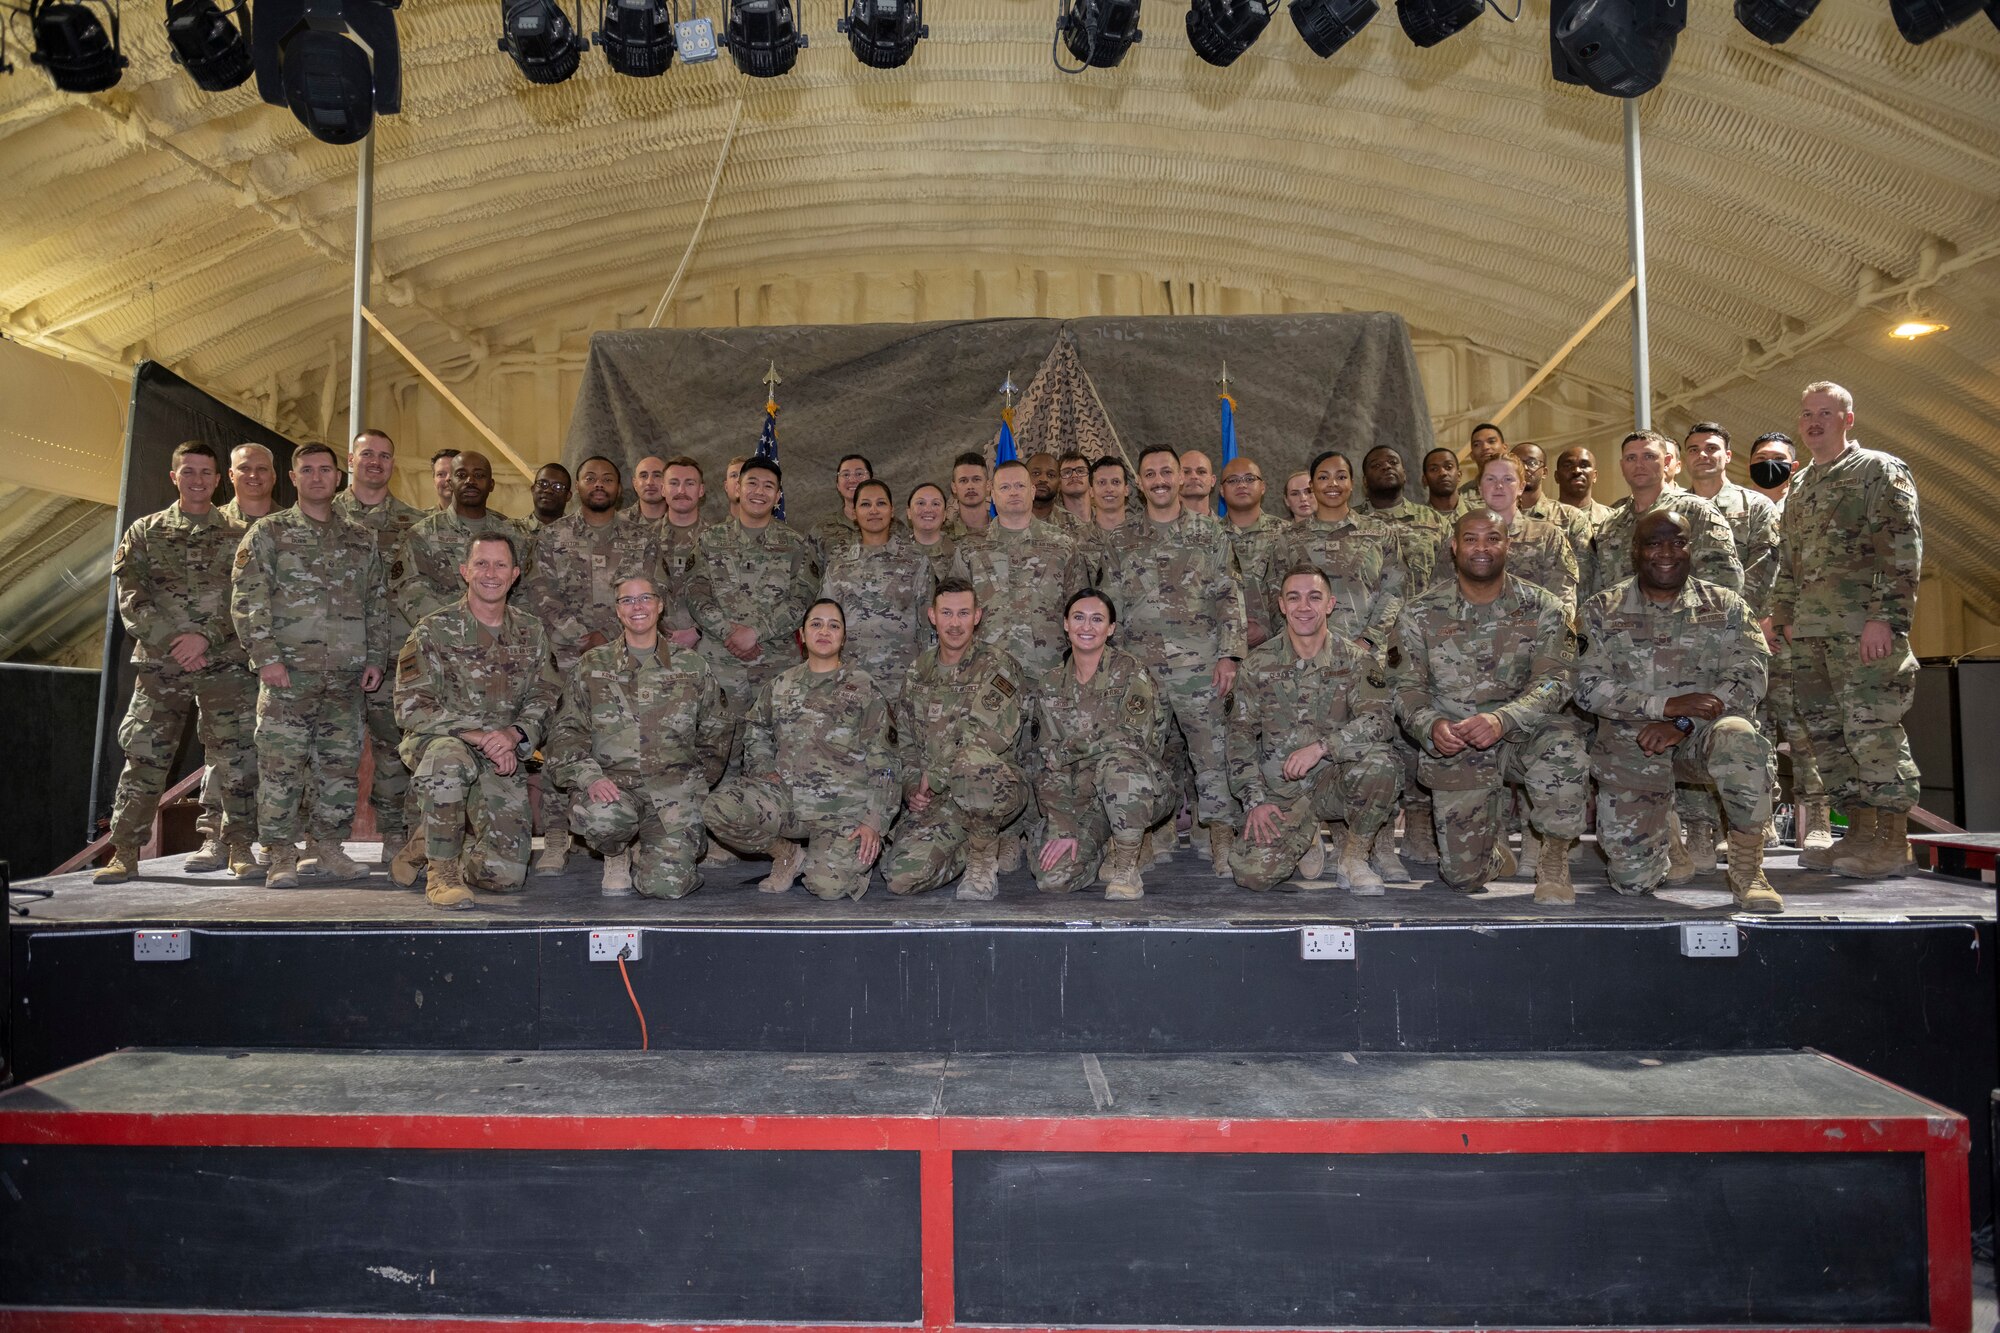 U.S. Airmen with the 332nd Air Expeditionary Wing pose for a group photo after a First Sergeant Symposium graduation Nov. 24, 2021, at an undisclosed location somewhere in Southwest Asia. A First Sergeant Symposium teaches technical sergeants and master sergeants the fundamentals to serve as interim first sergeants for their respective units. (U.S. Air Force photo by Senior Airman Cameron Otte)